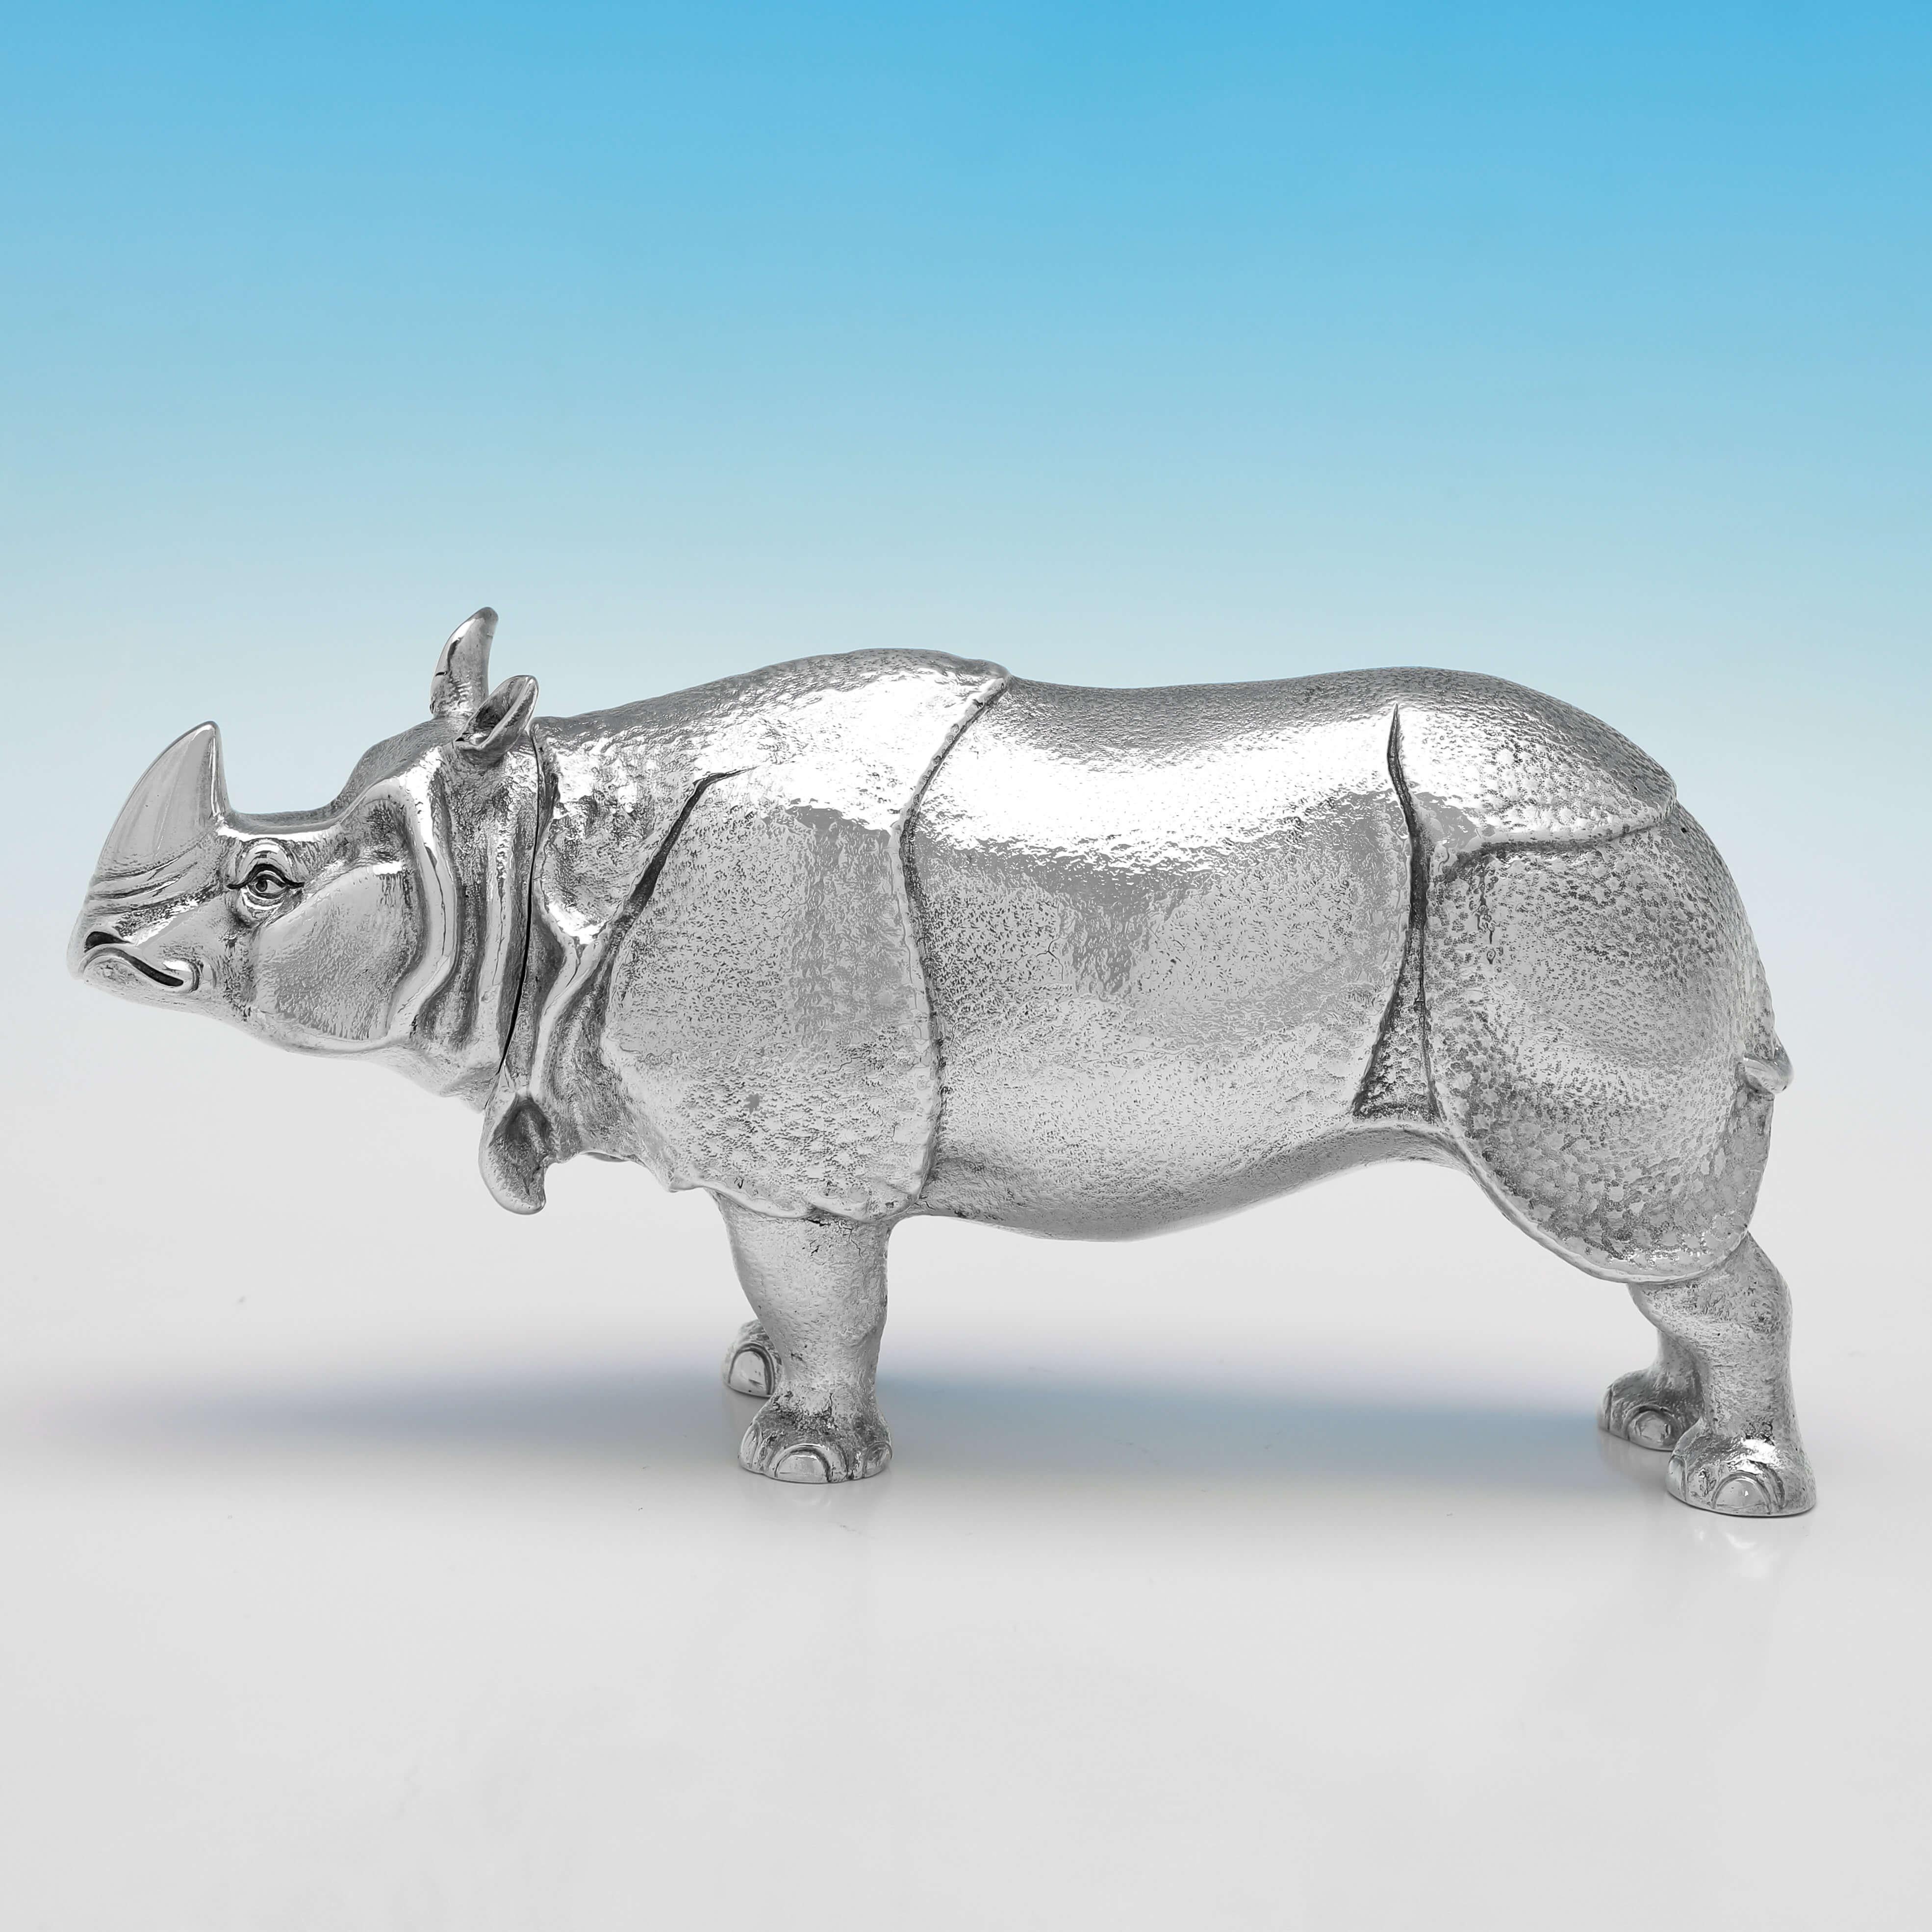 Hallmarked in Chester in 1906 by Berthold Muller, this very rare, and very handsome, Antique Sterling Silver Model of a Rhinoceros, is wonderfully made. The rhinoceros measures 4.25